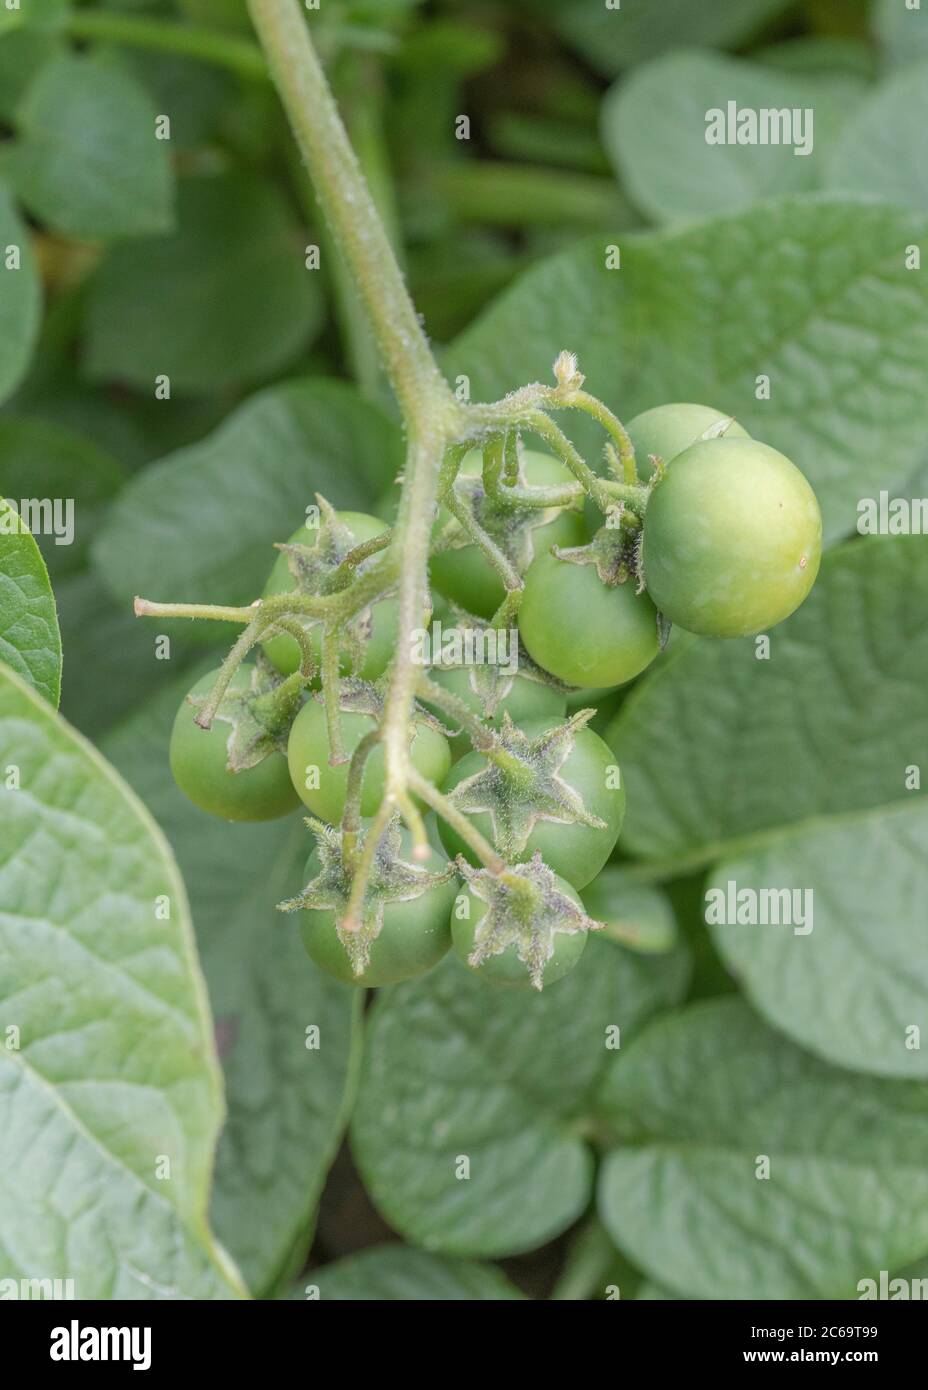 Poisonous toxic green potato berries, cherries, fruit or seed pods close up. These are what form after potato flowers. Plant poisons, poisonous plants Stock Photo